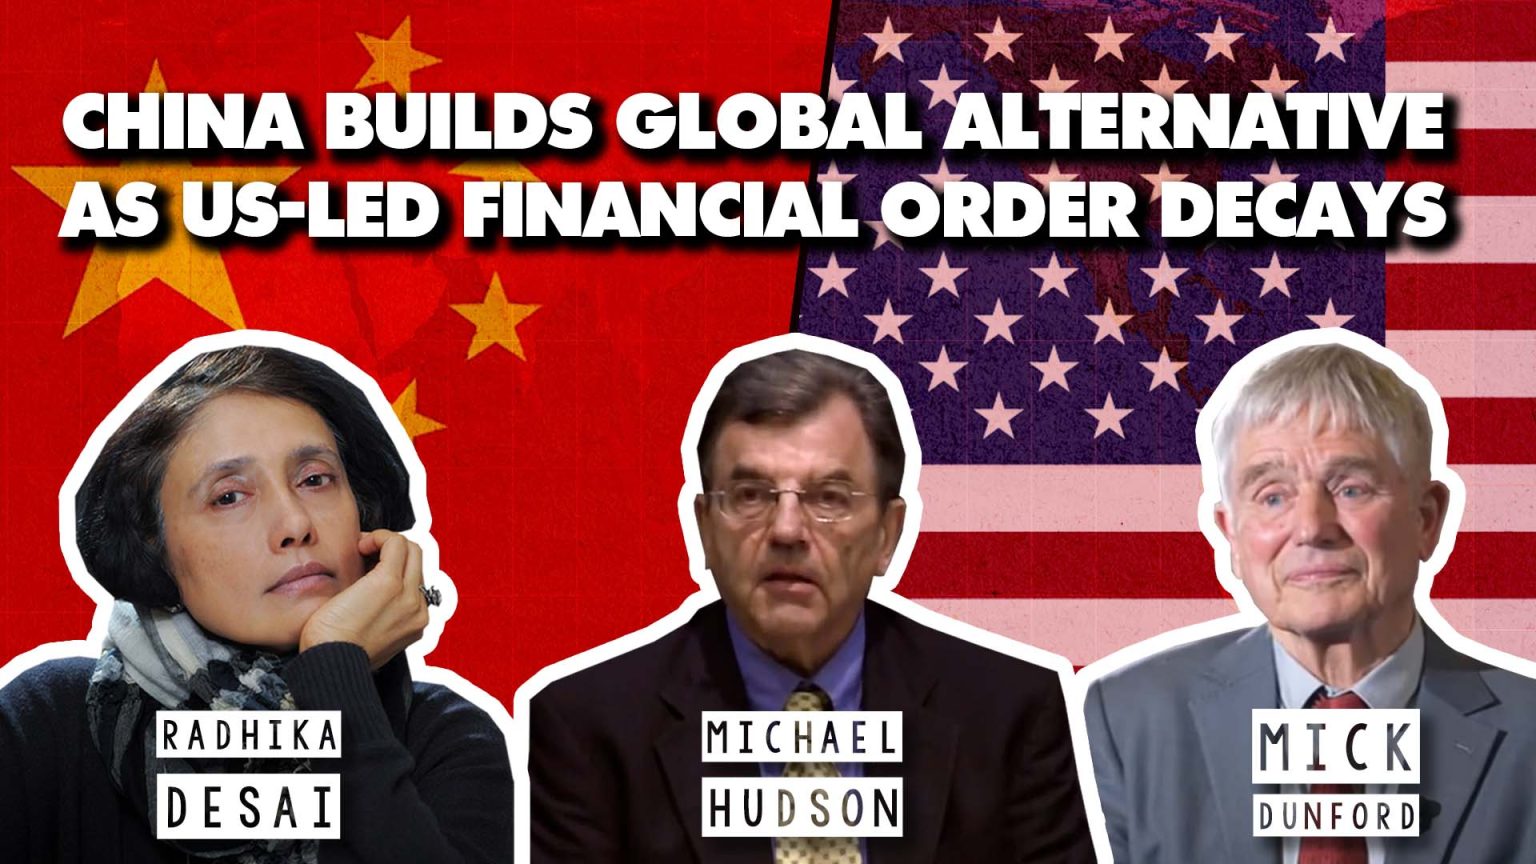 An analysis of how China is building a global economic alternative, while the US-led neoliberal financial order decays.